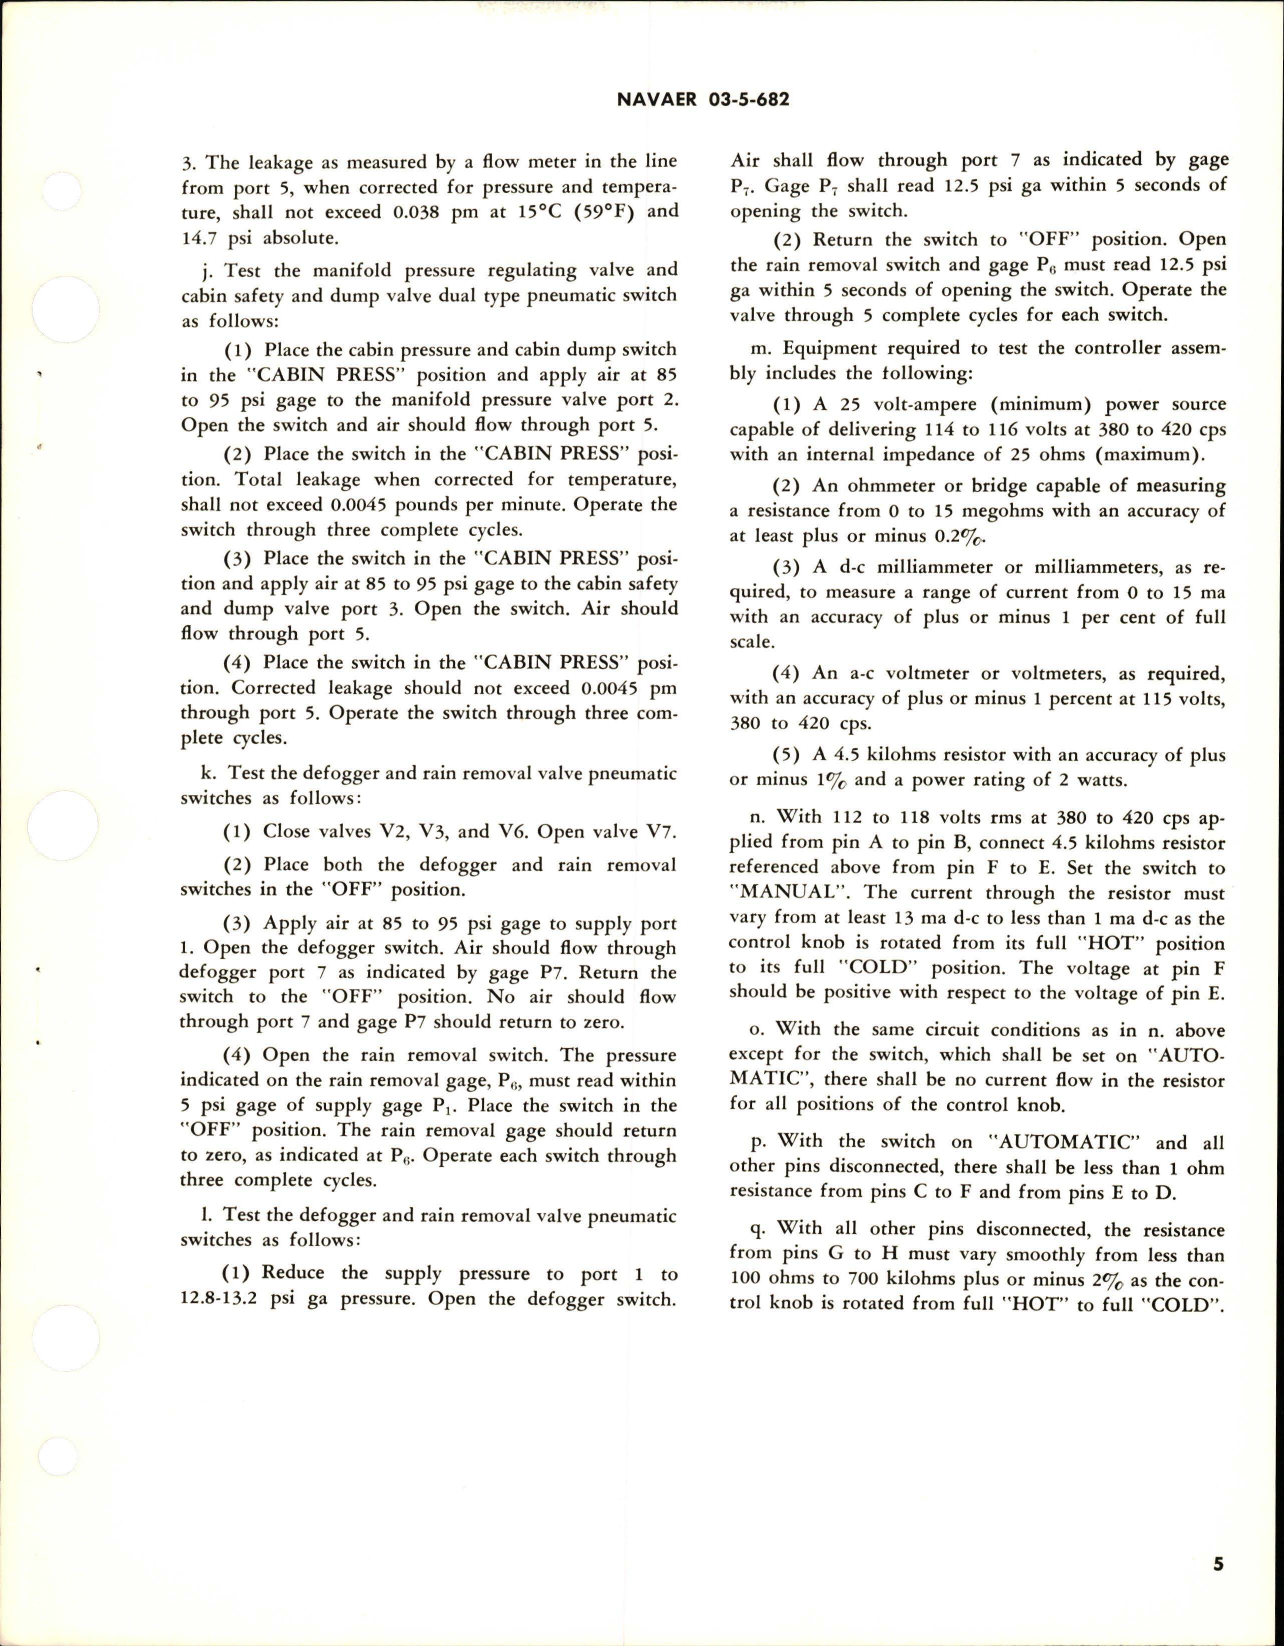 Sample page 5 from AirCorps Library document: Overhaul Instructions with Parts Breakdown for Manual Panel Control - Part 514871